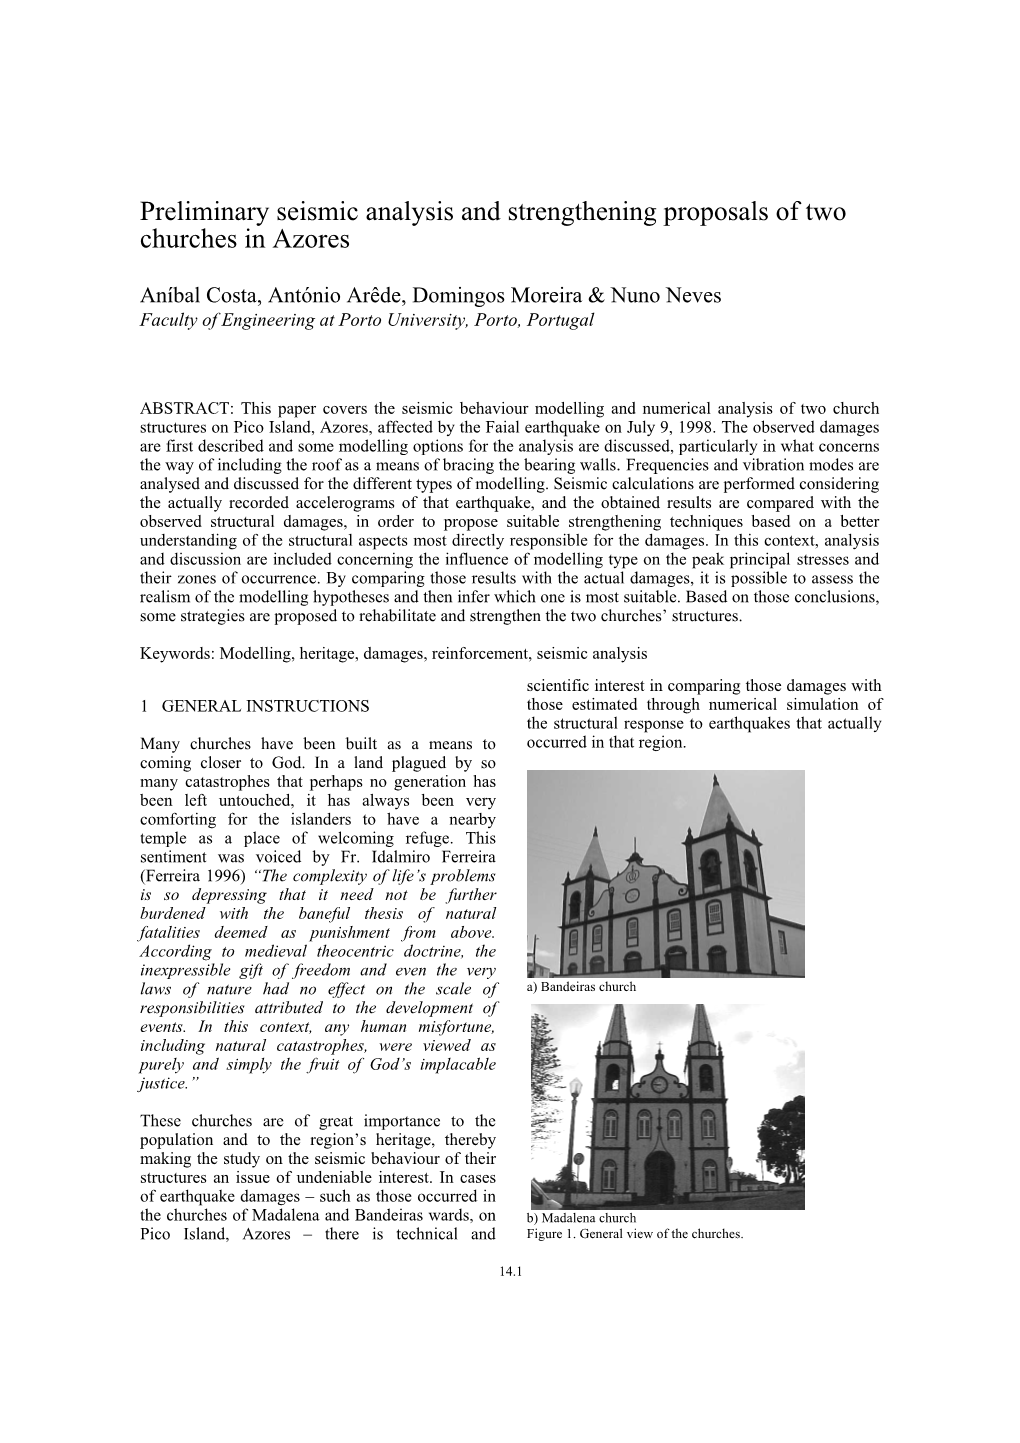 Preliminary Seismic Analysis and Strengthening Proposals of Two Churches in Azores